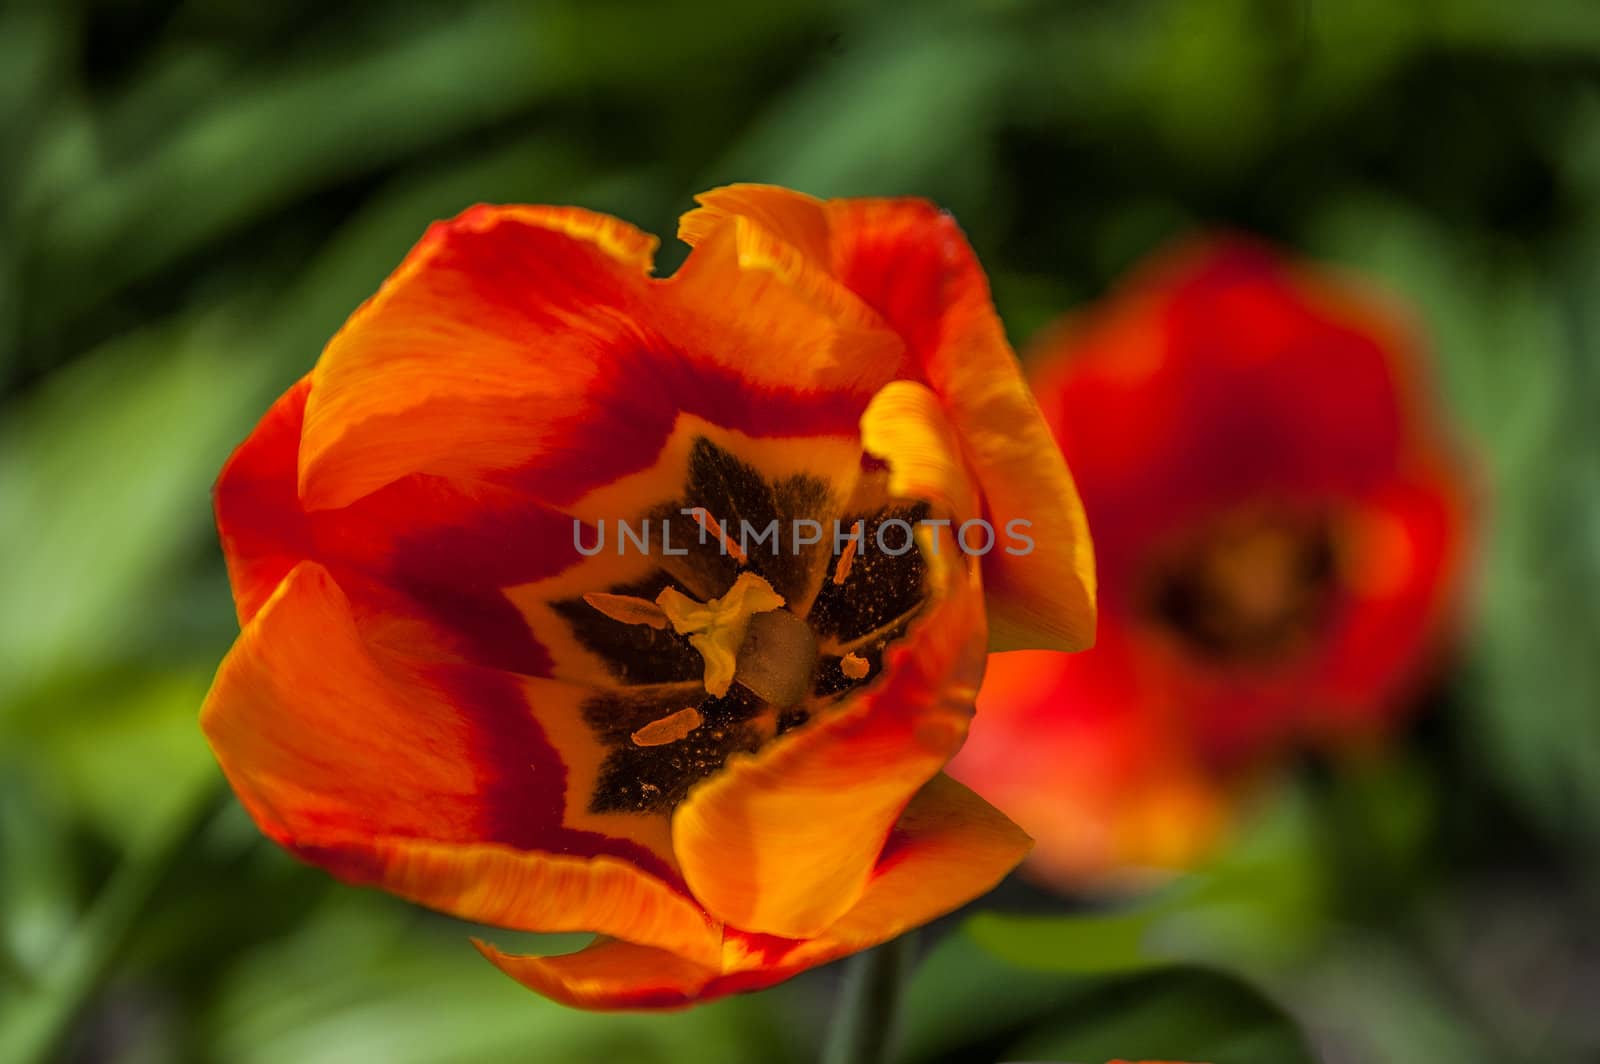 Tulip blossom by georgeogray